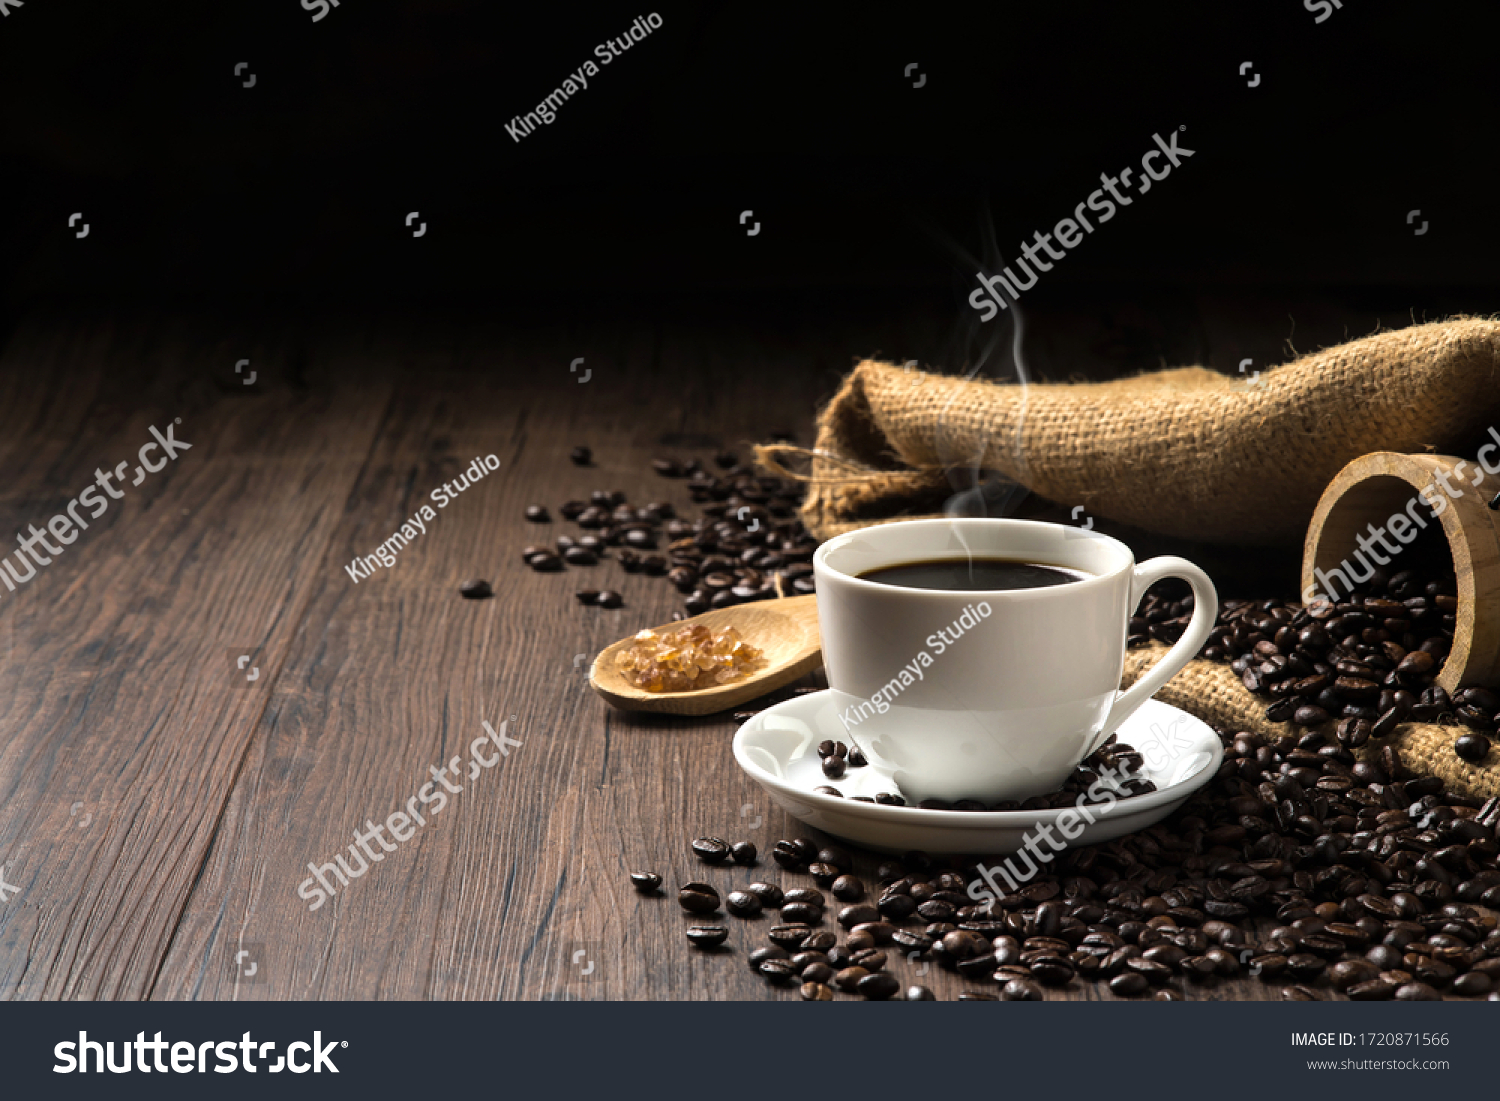 Hot coffee in a white coffee cup and many coffee beans placed around and sugar on a wooden table in a warm, light atmosphere, on dark background, with copy space. #1720871566